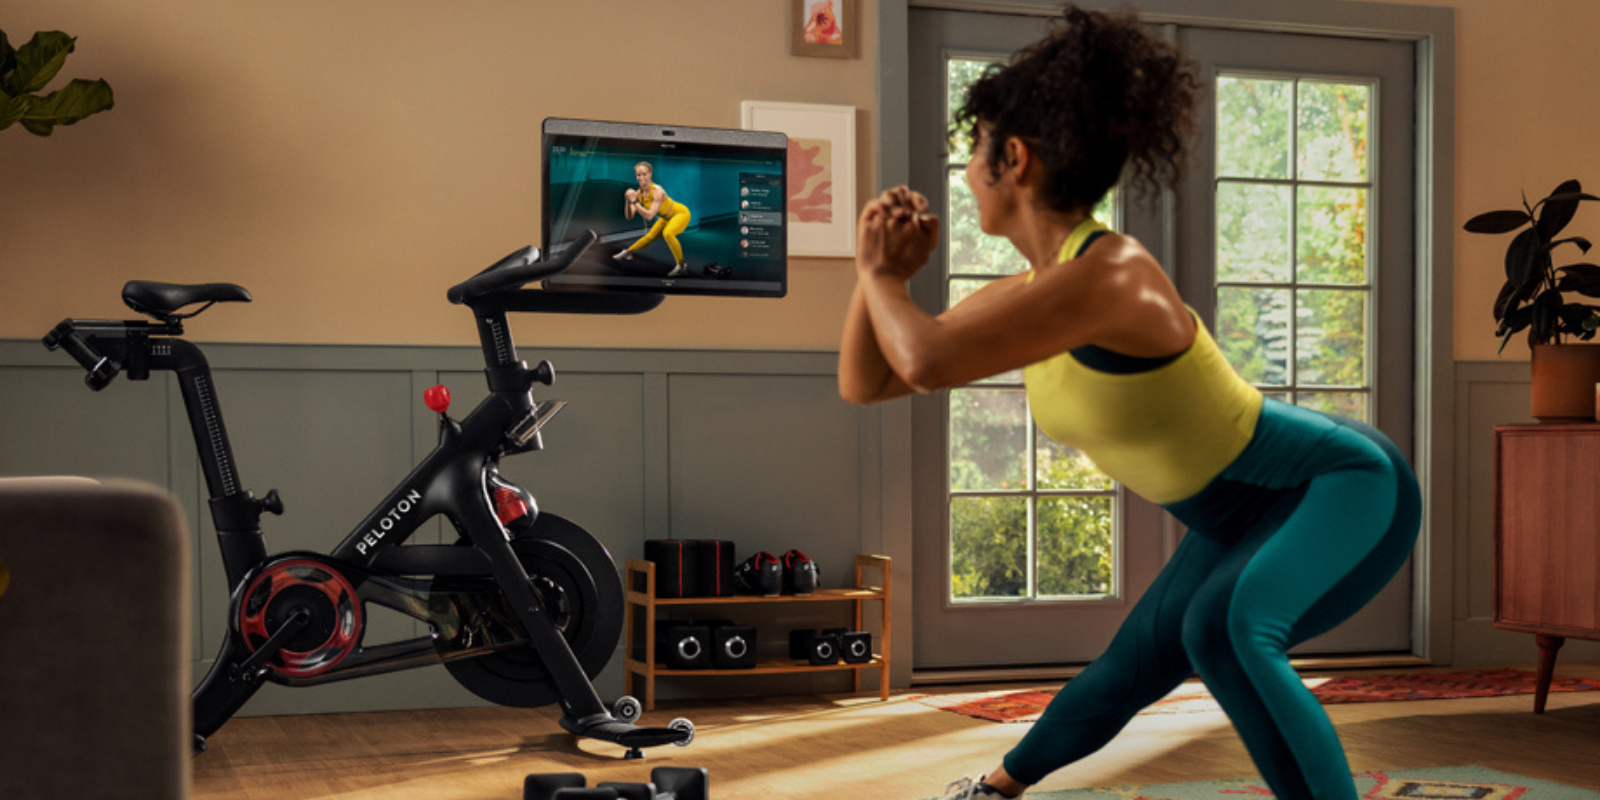 What Does the Future Hold for Digital Fitness Brands? 